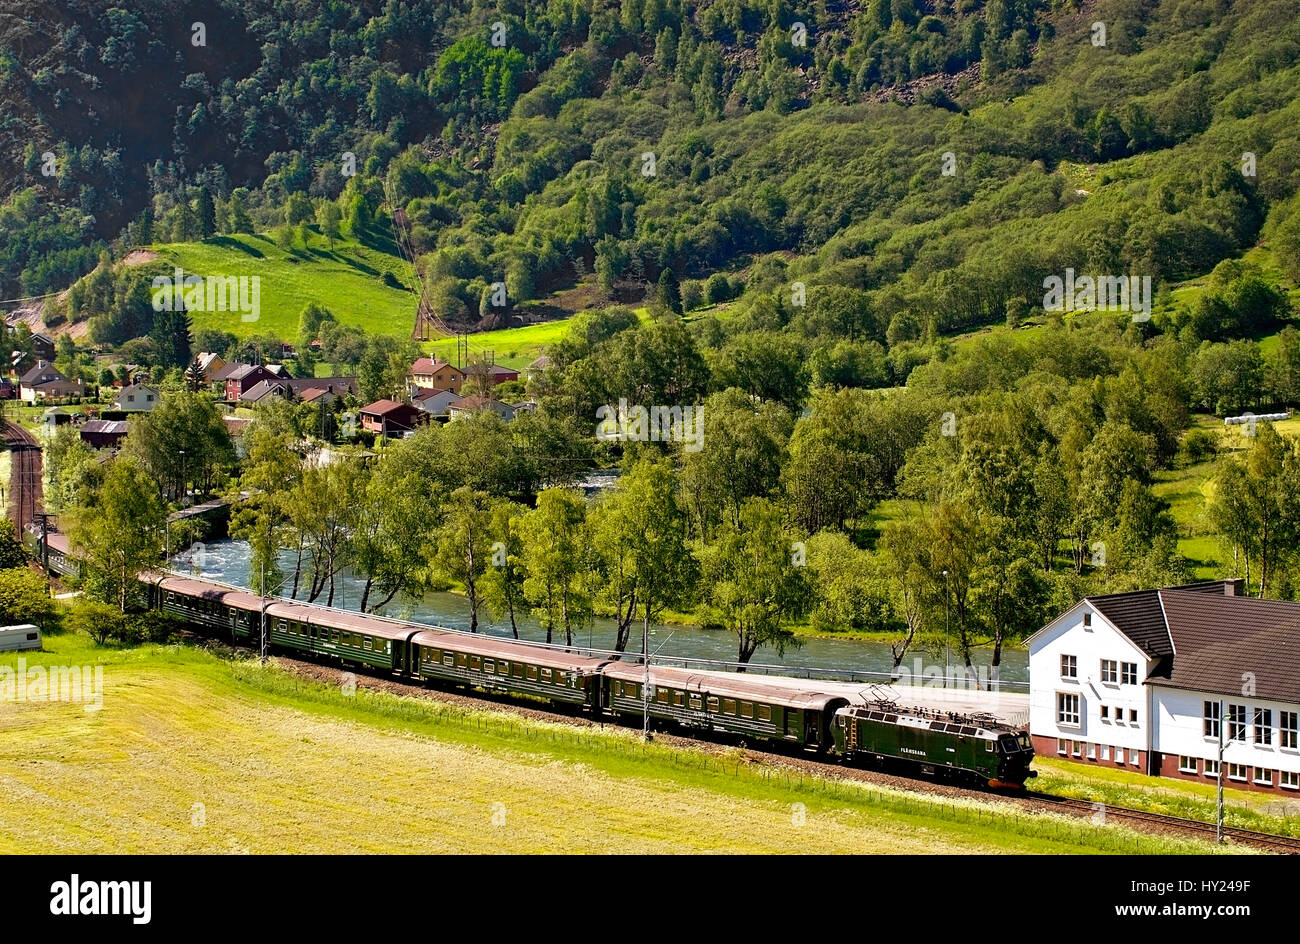 This image shows the famous Flam Train, one of the highest altidute train operated worldwide, driving through a typical Norwegian landscape near Flam  Stock Photo